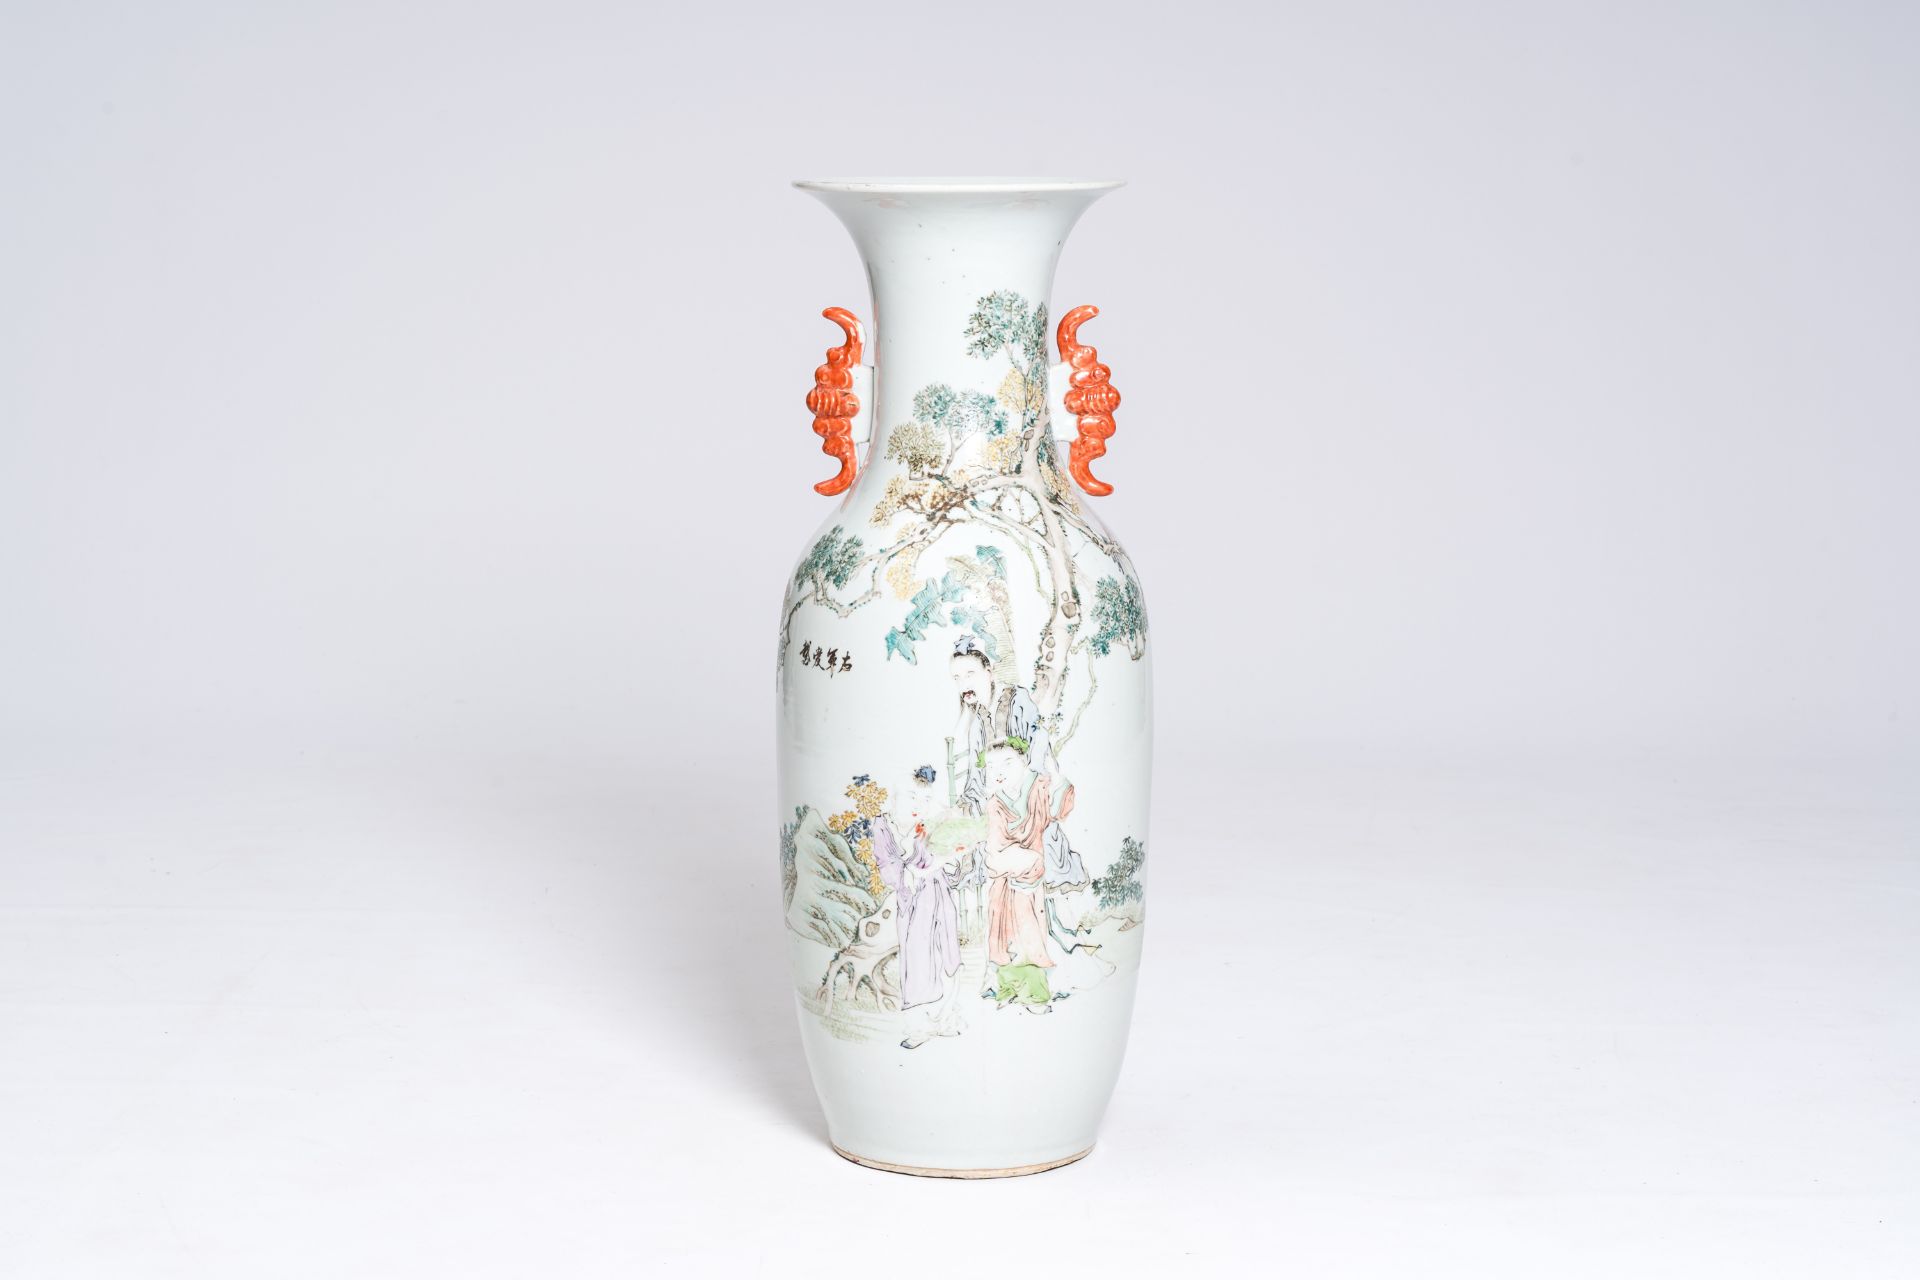 A Chinese qianjiang cai vase with figures in a landscape, signed Jin Hongbin é‡‘é´»è³“, dated 1911